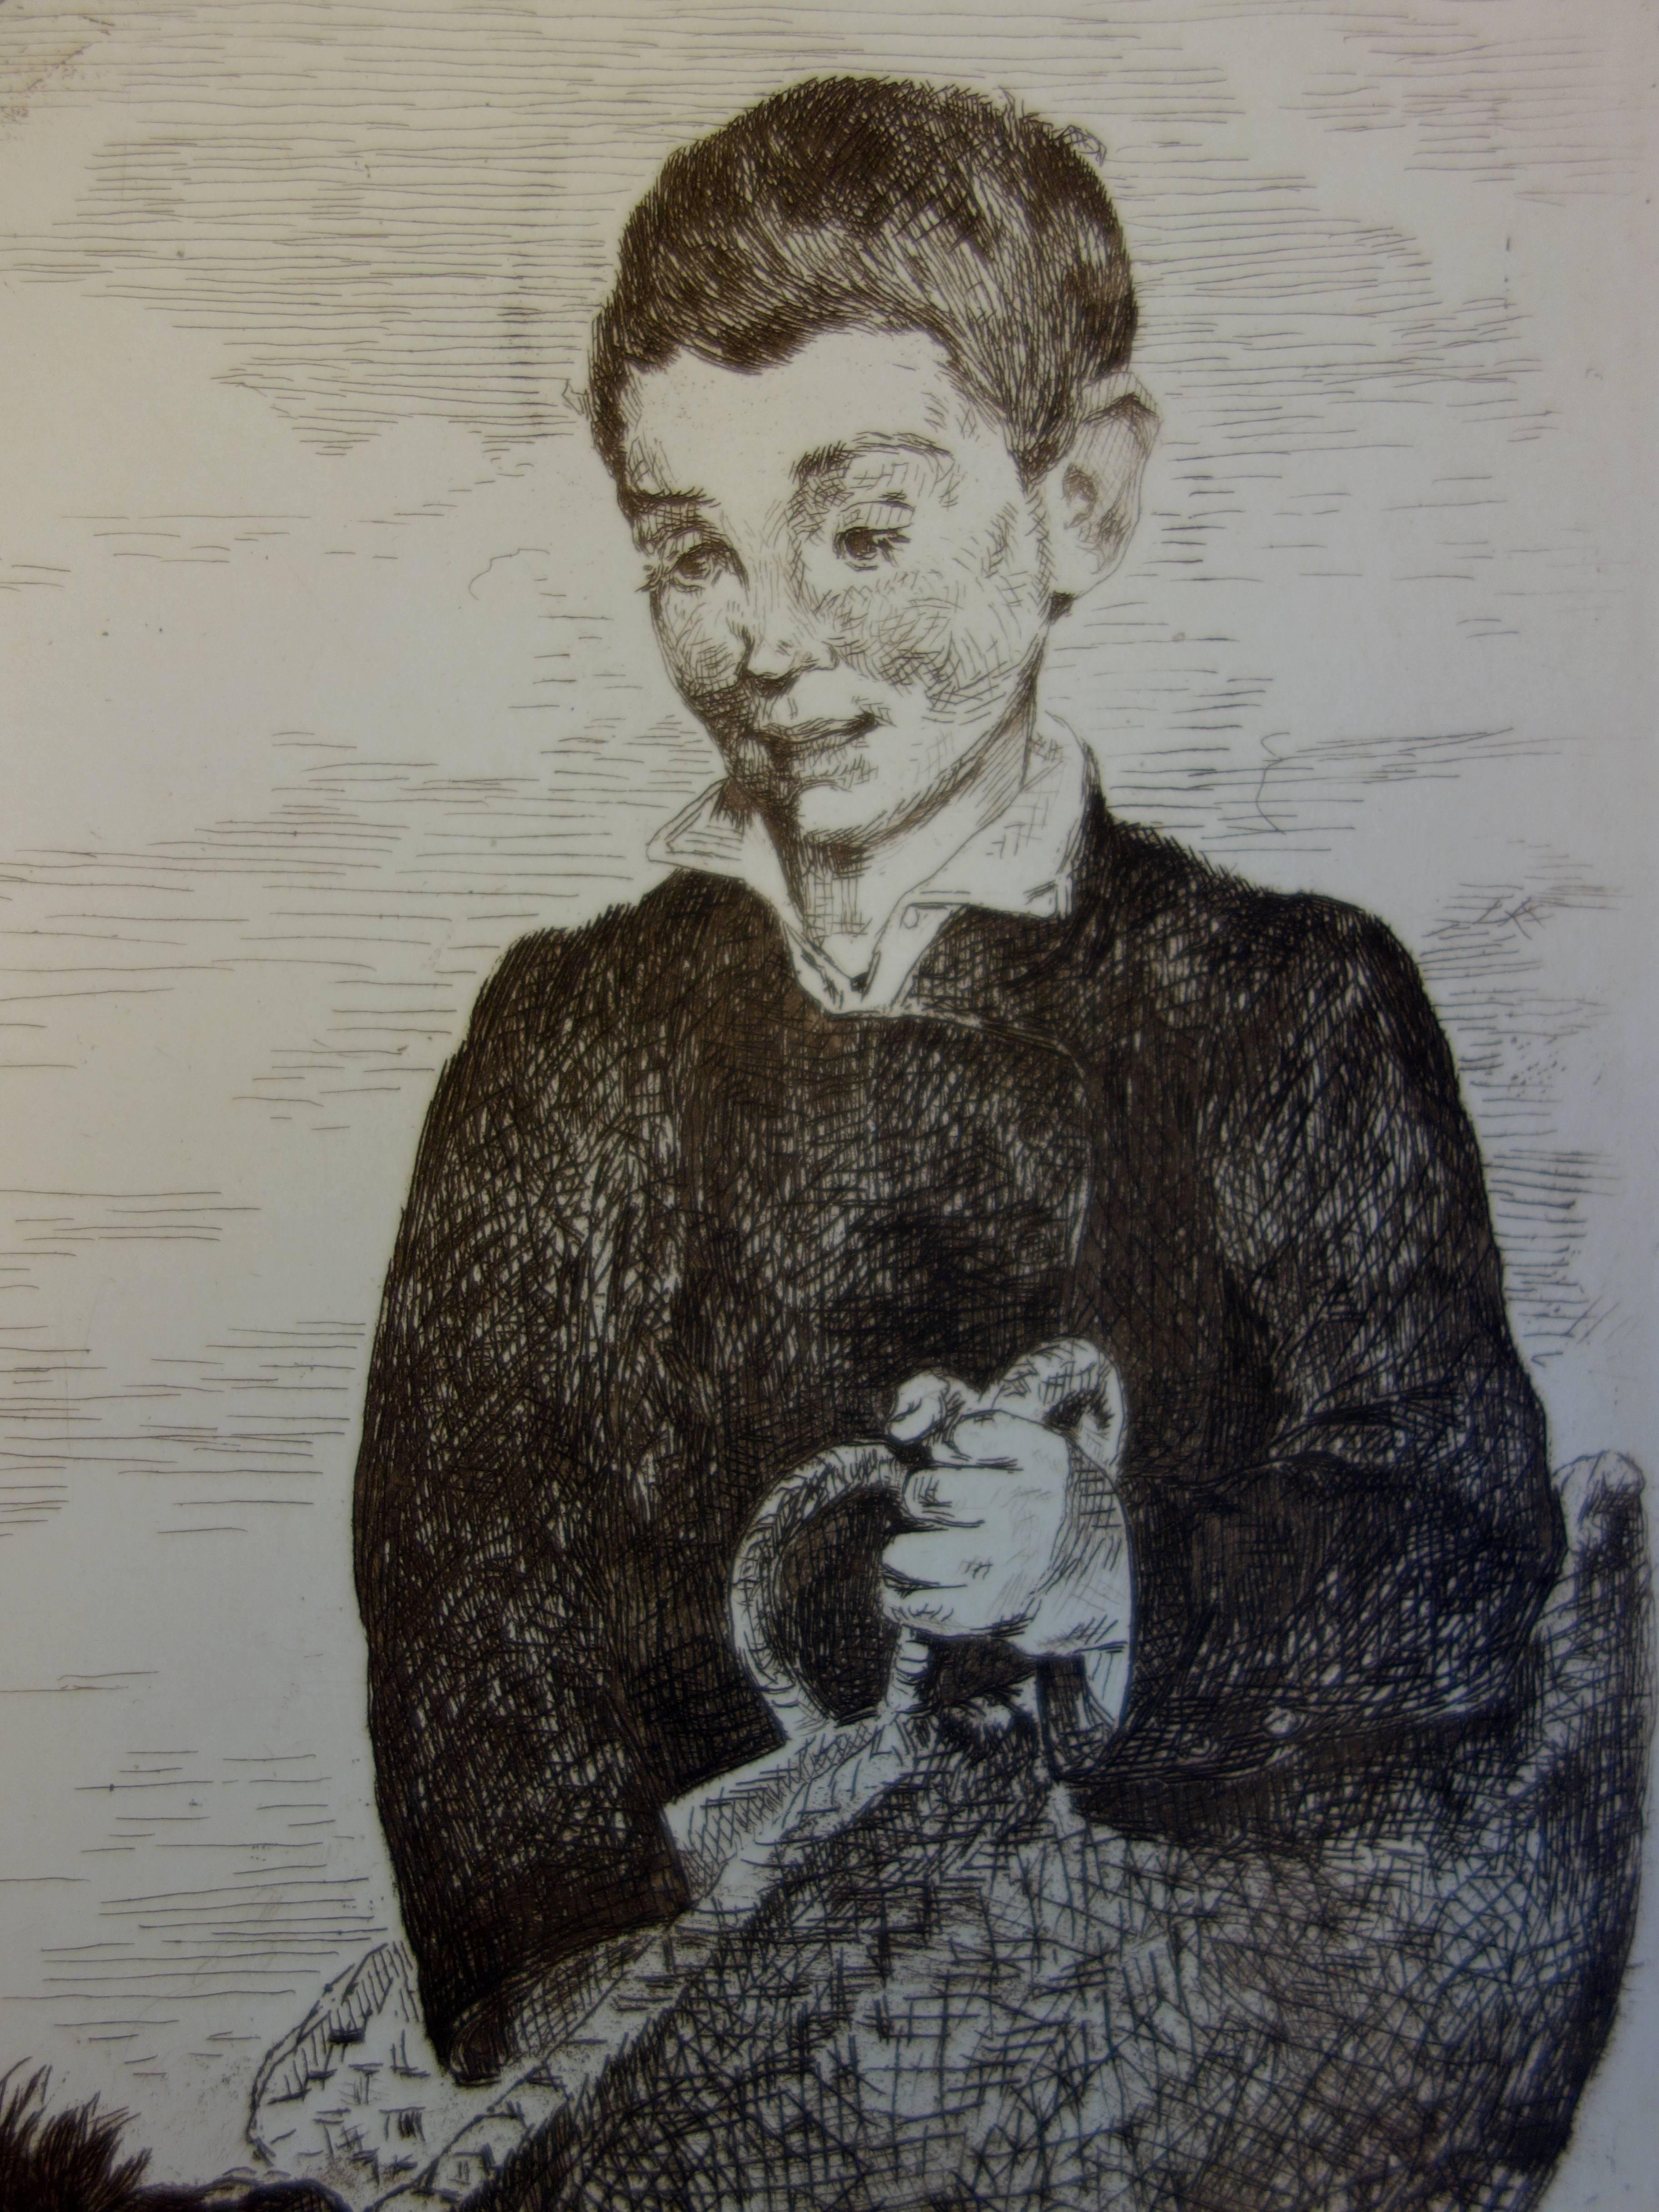 Boy with a Dog - Origninal Etching - 1862 - Impressionist Print by Edouard Manet